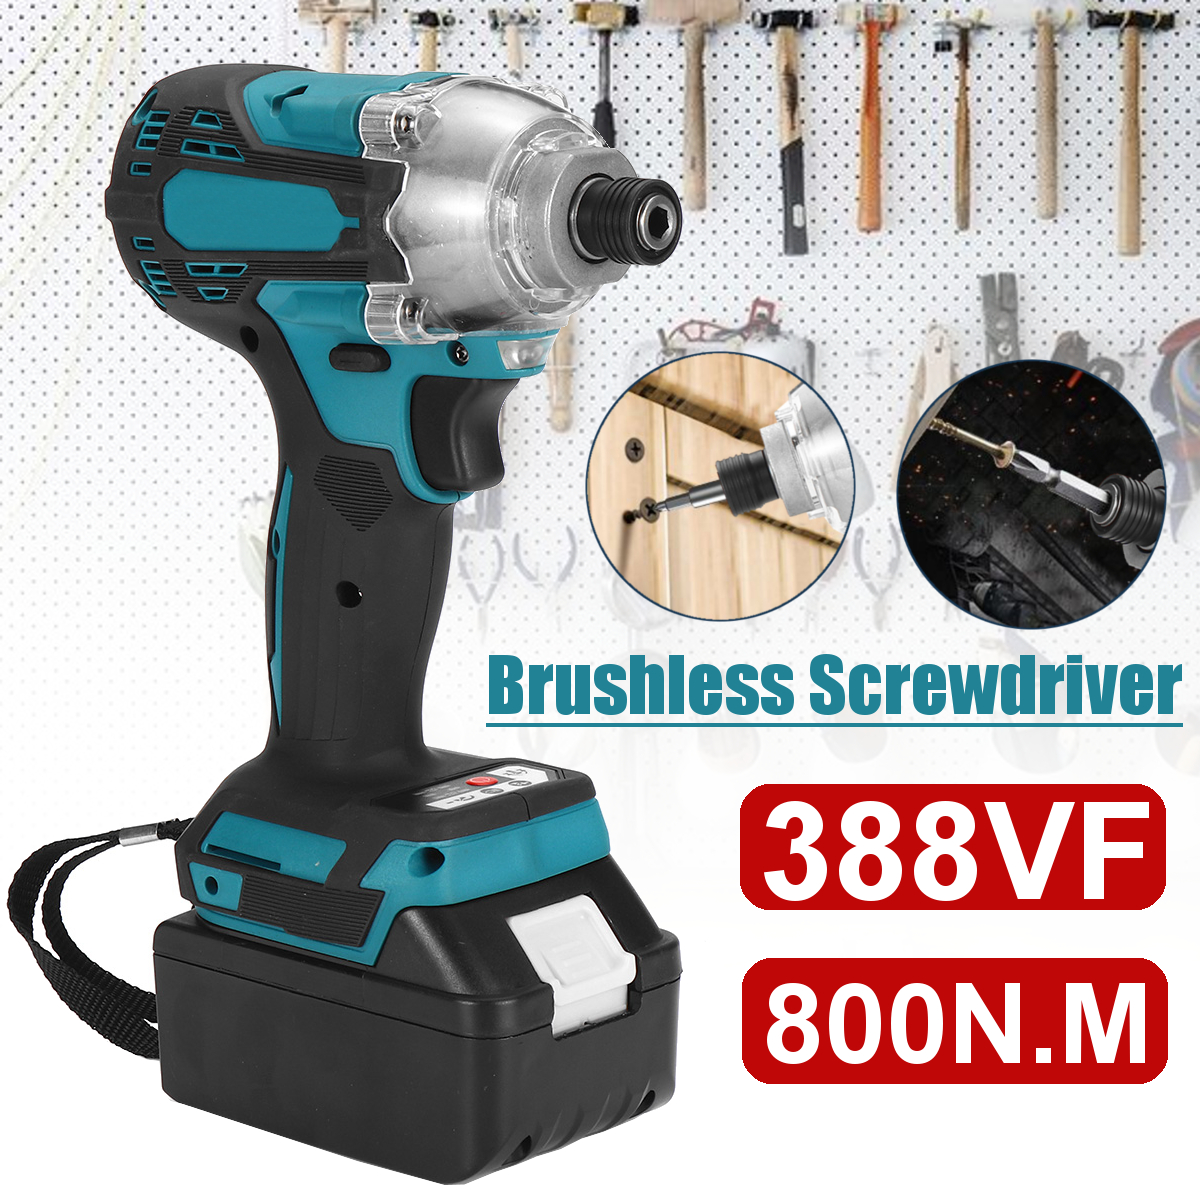 18V-14-inch-Brushless-Cordless-Electric-Screwdriver-Driver-Rechargeable-W-Battery-1790859-1